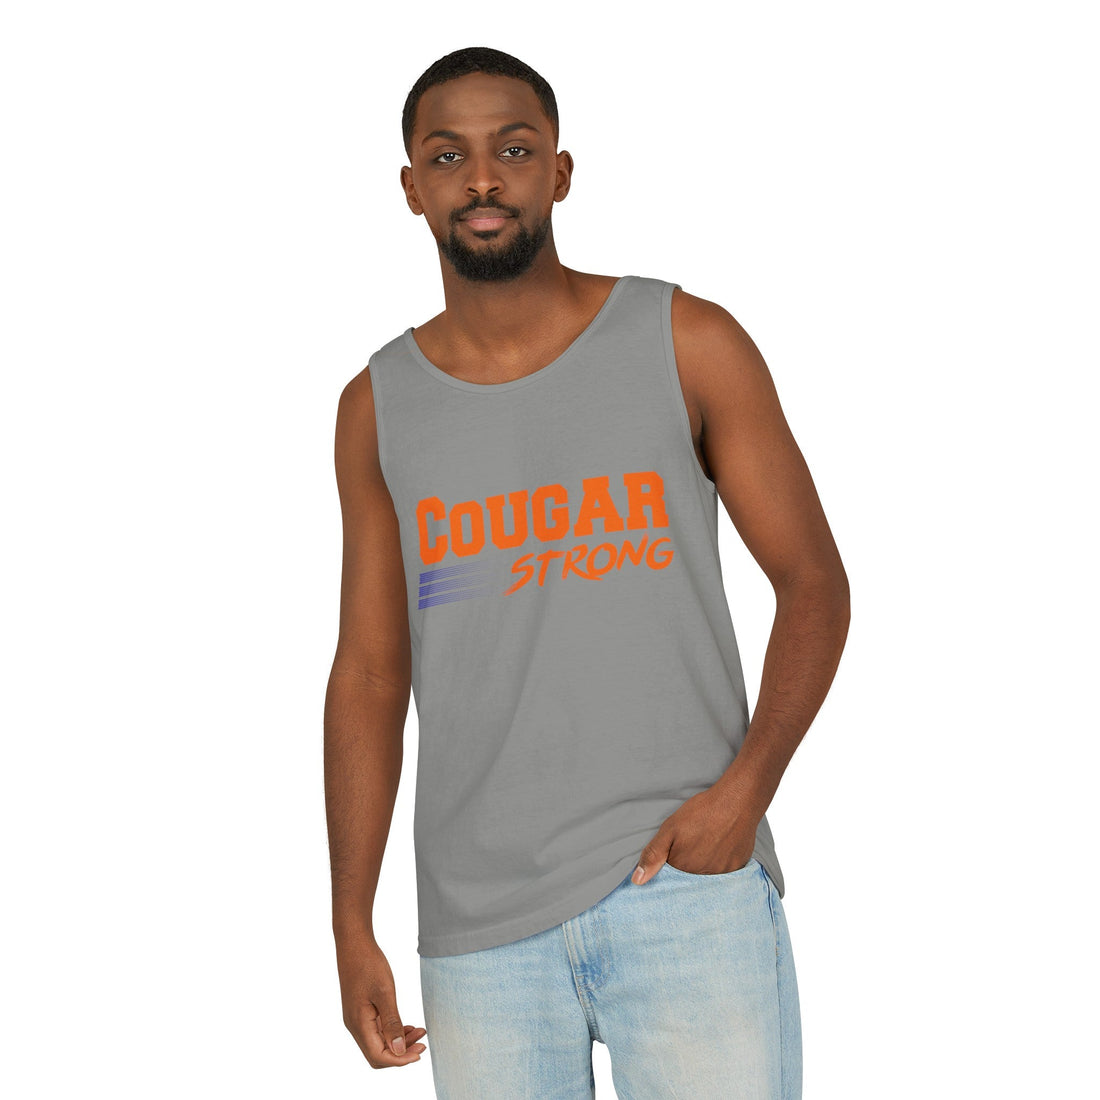 Cougar Strong Unisex Garment - Dyed Tank Top - Tank Top - Positively Sassy - Cougar Strong Unisex Garment - Dyed Tank Top